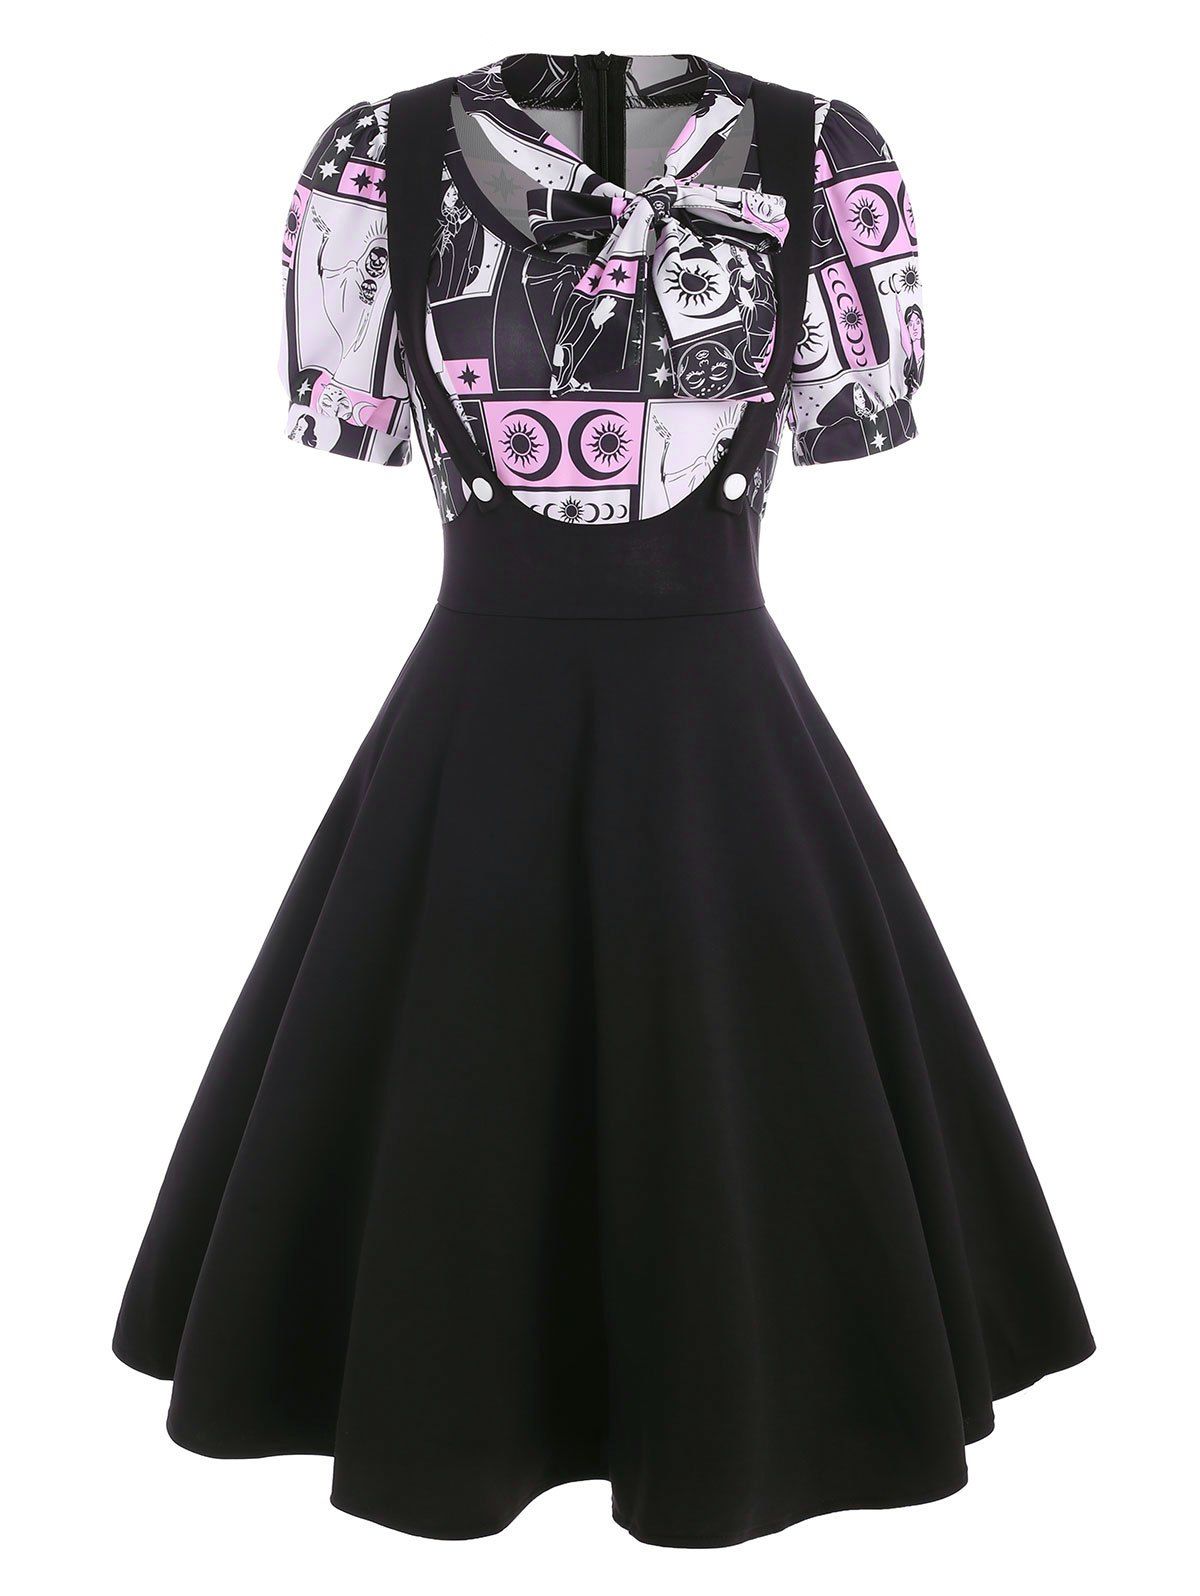 Gothic Vintage Skull Print Bowknot Puff Sleeve 2 In 1 A Line Dress - LIGHT PINK L